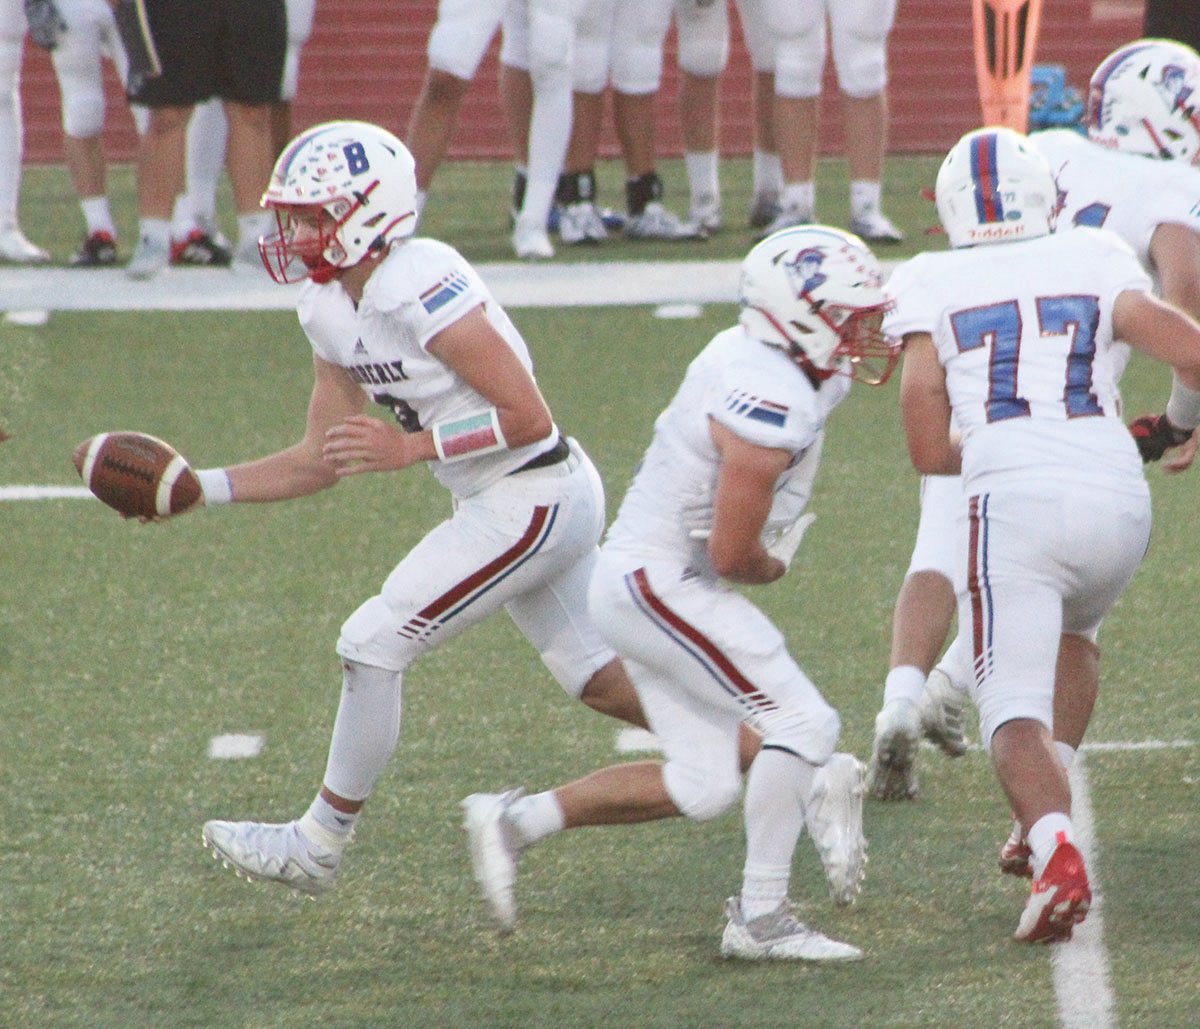 Moberly High School quarterback Collin Huffman (8) executes a fake hand-off during last Friday’s game on the road at Winfield. Huffman produced more than 100 rushing yards, and he passed for 150 more in a 39-21 victory, the Spartans second straight.